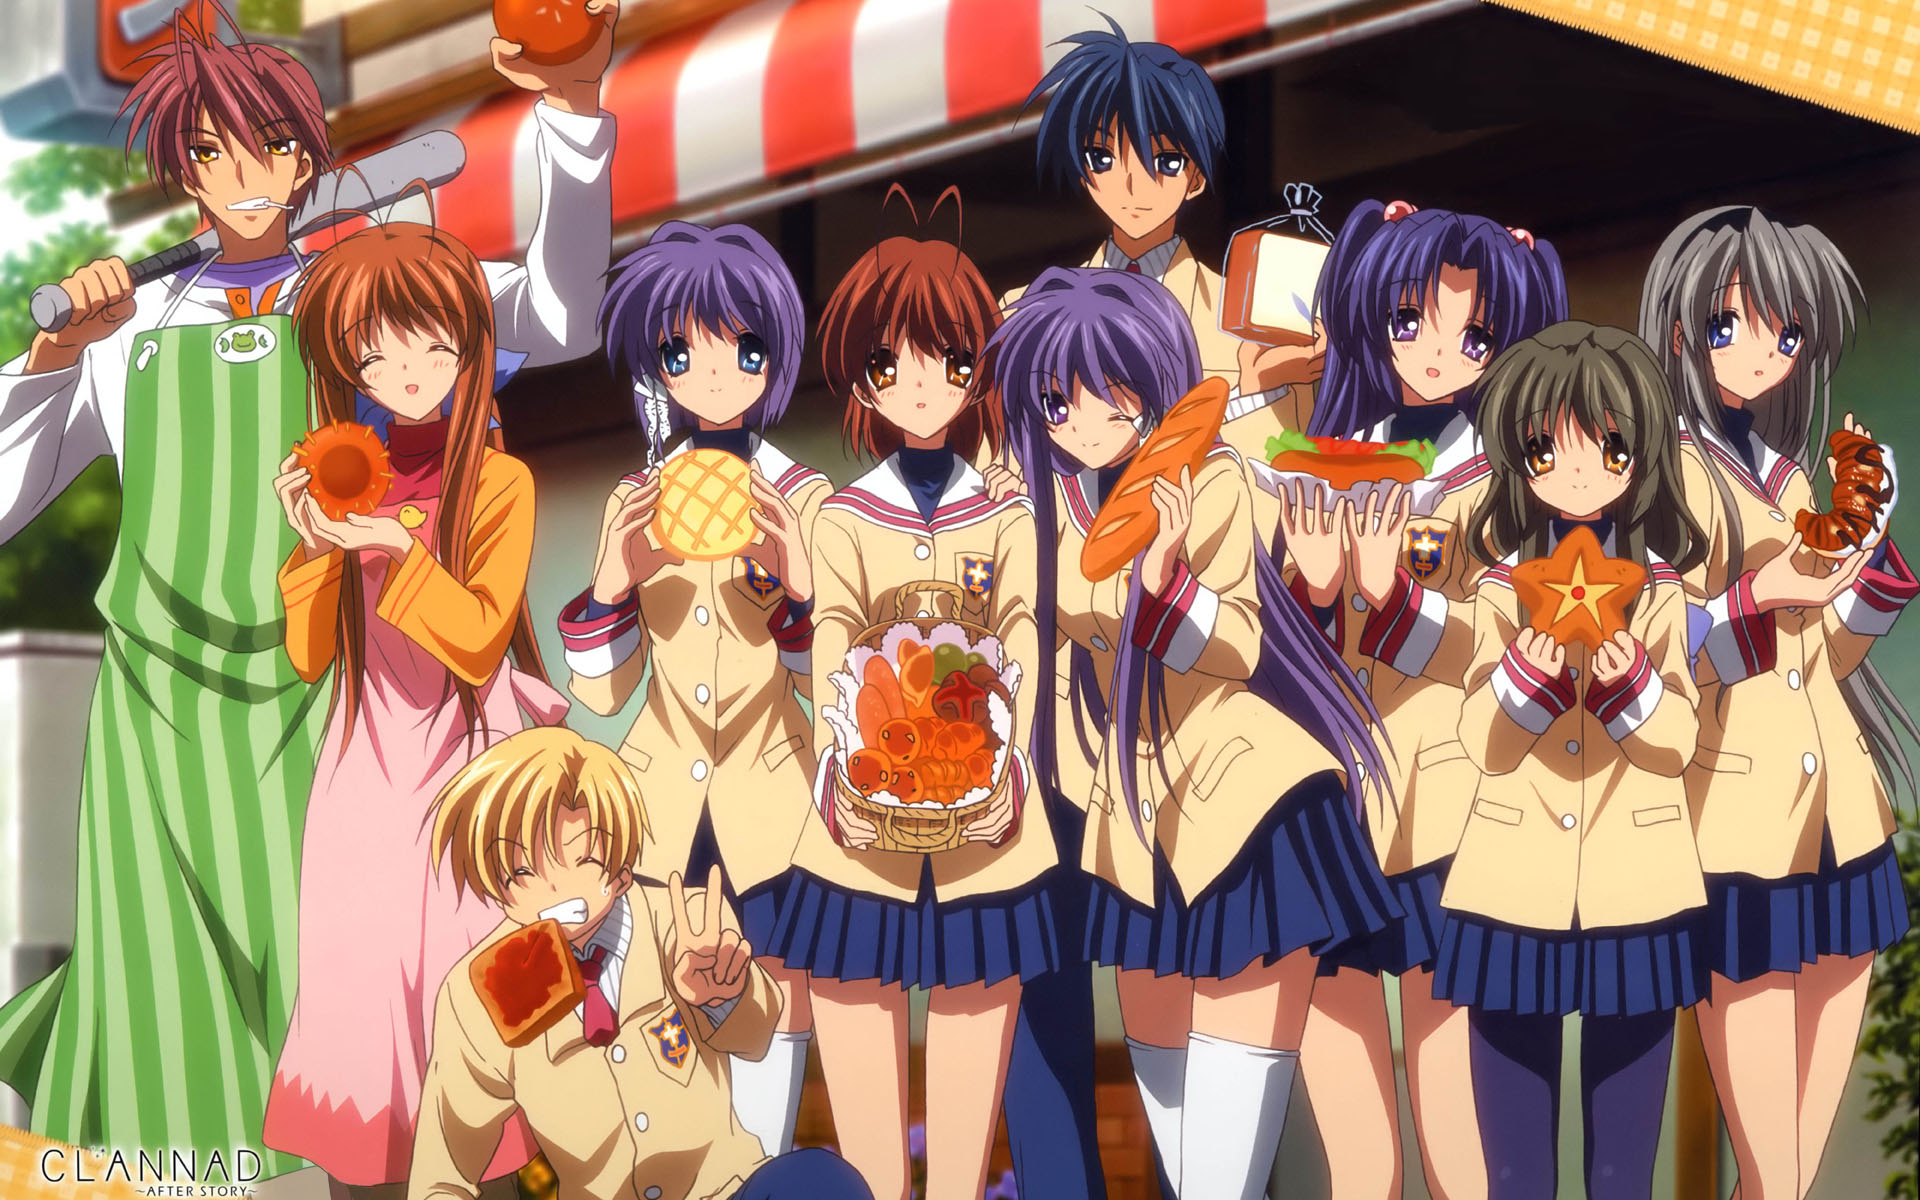 Clannad, People, and a Philosophy of Doing – Between Linux and Anime